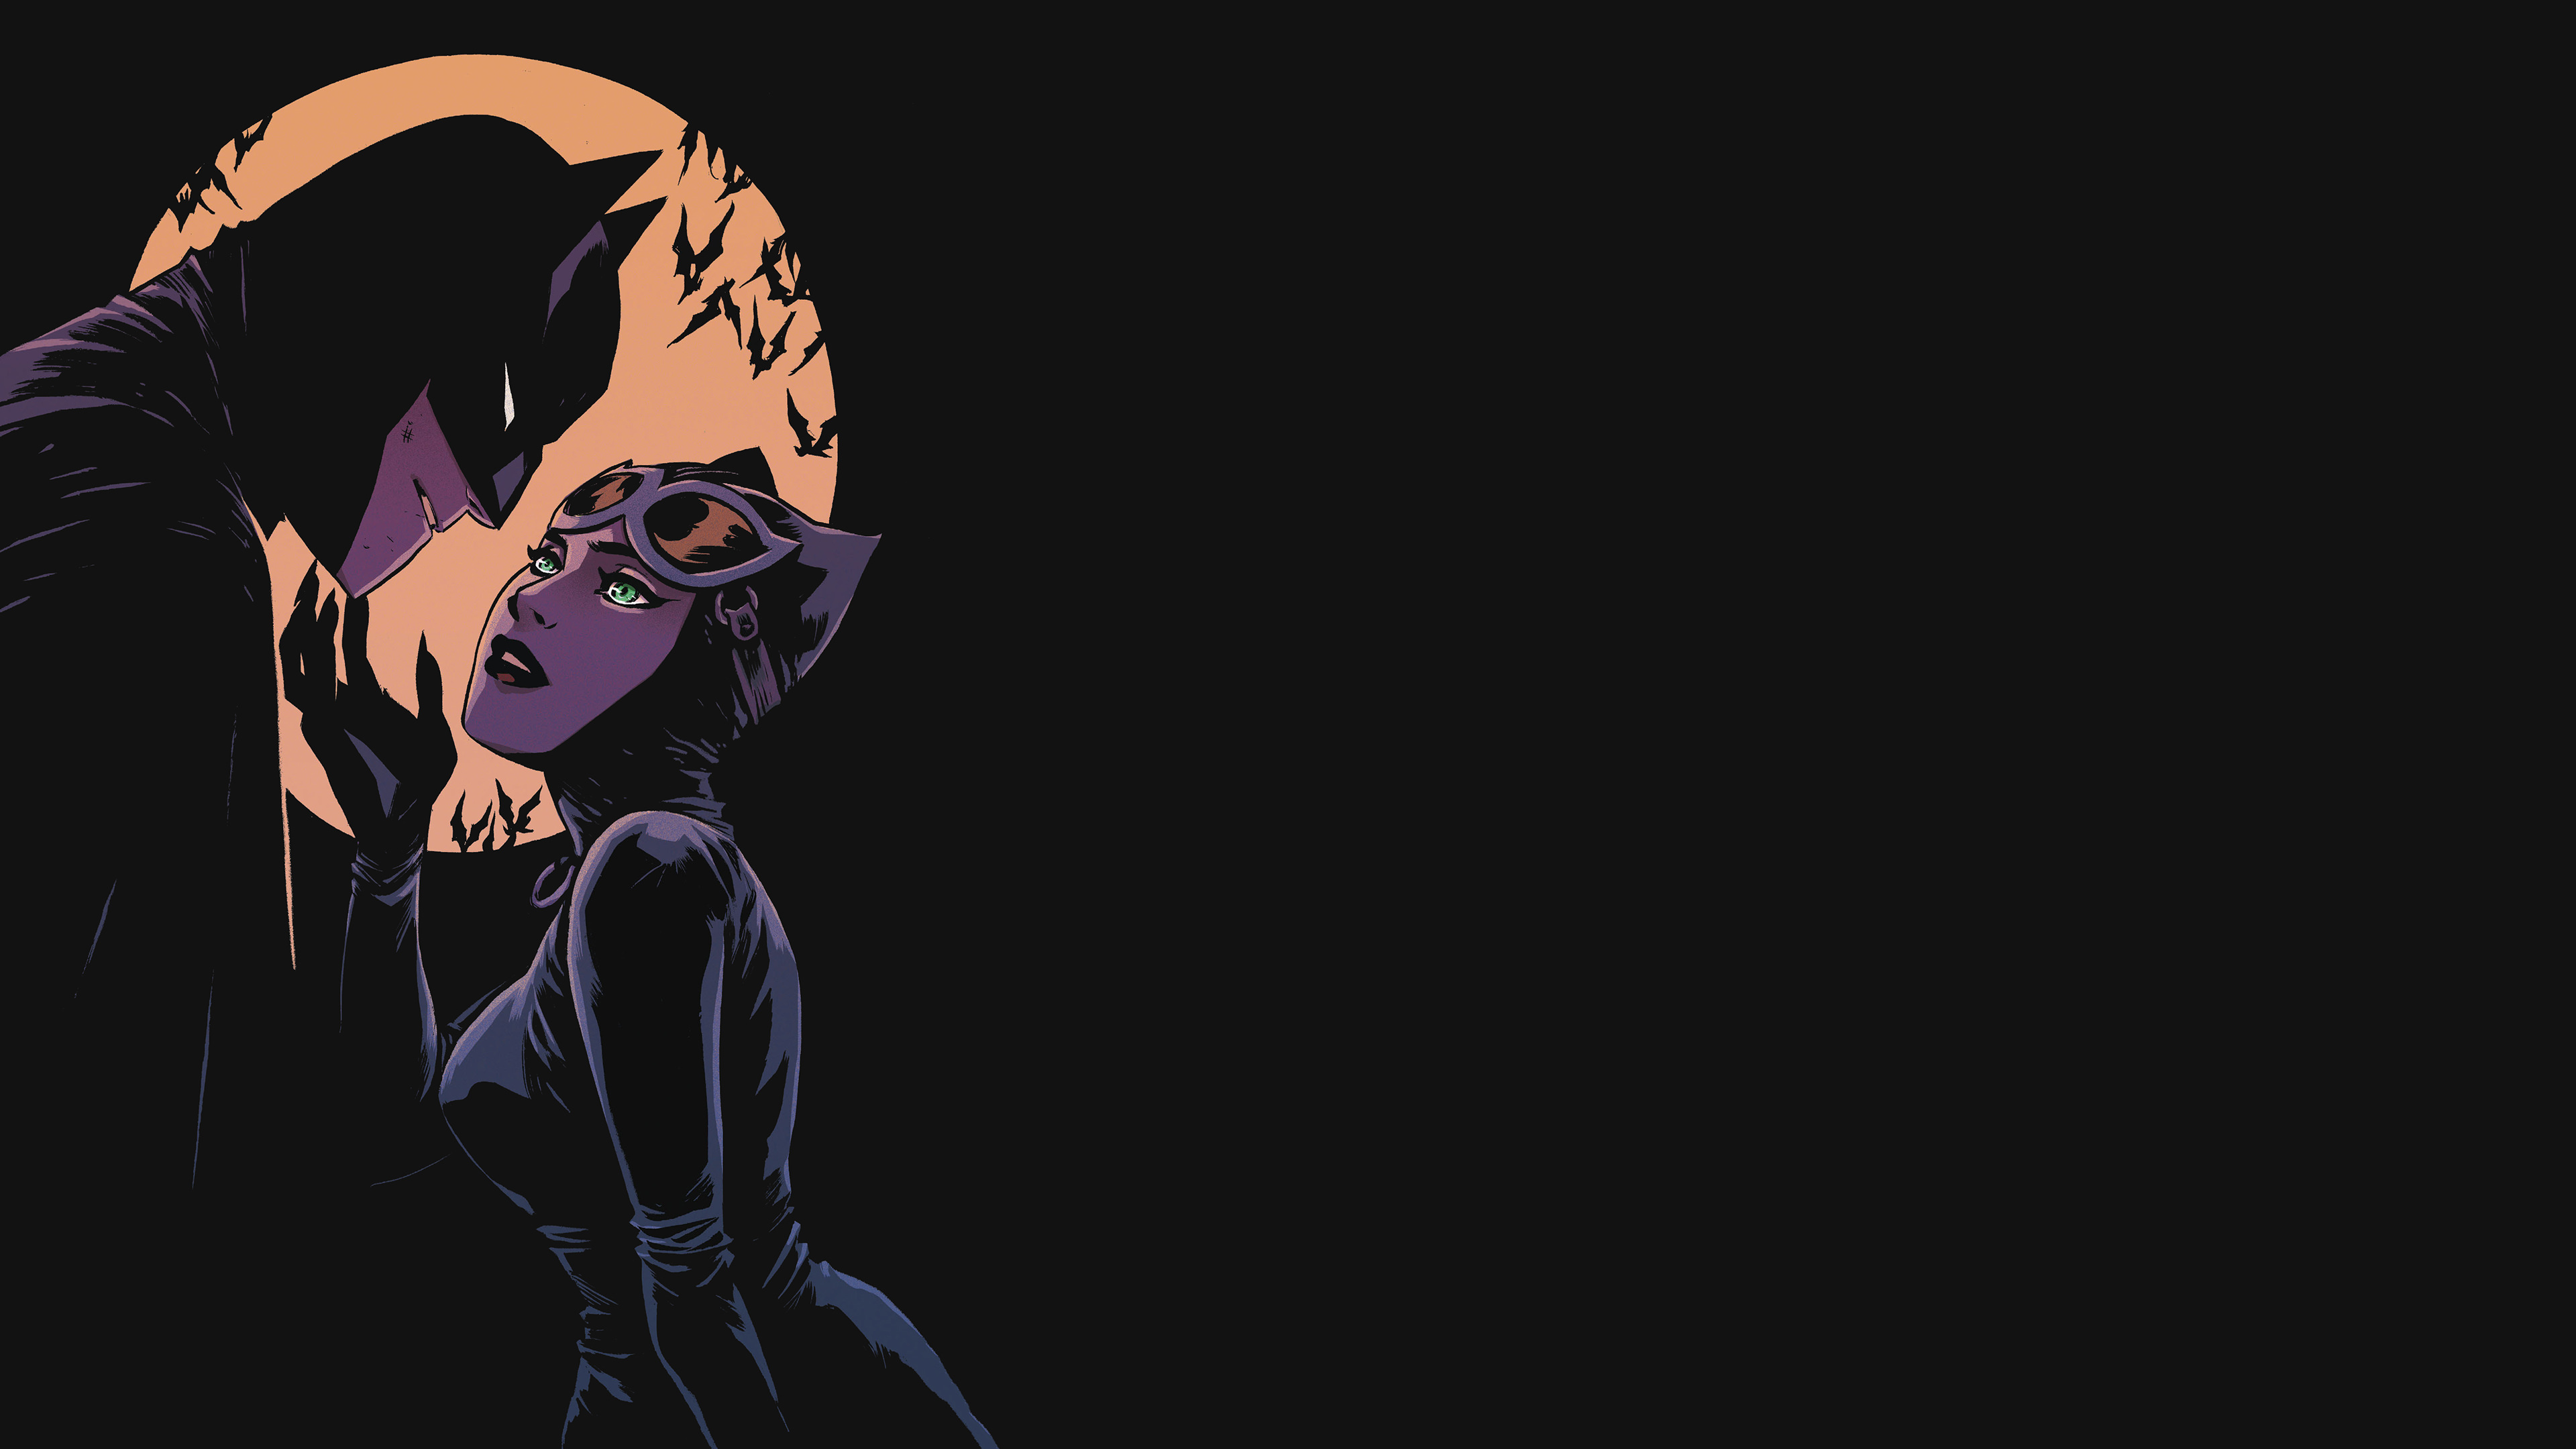 Catwoman: One of Batman's most-well known enemies, Comics. 3840x2160 4K Wallpaper.